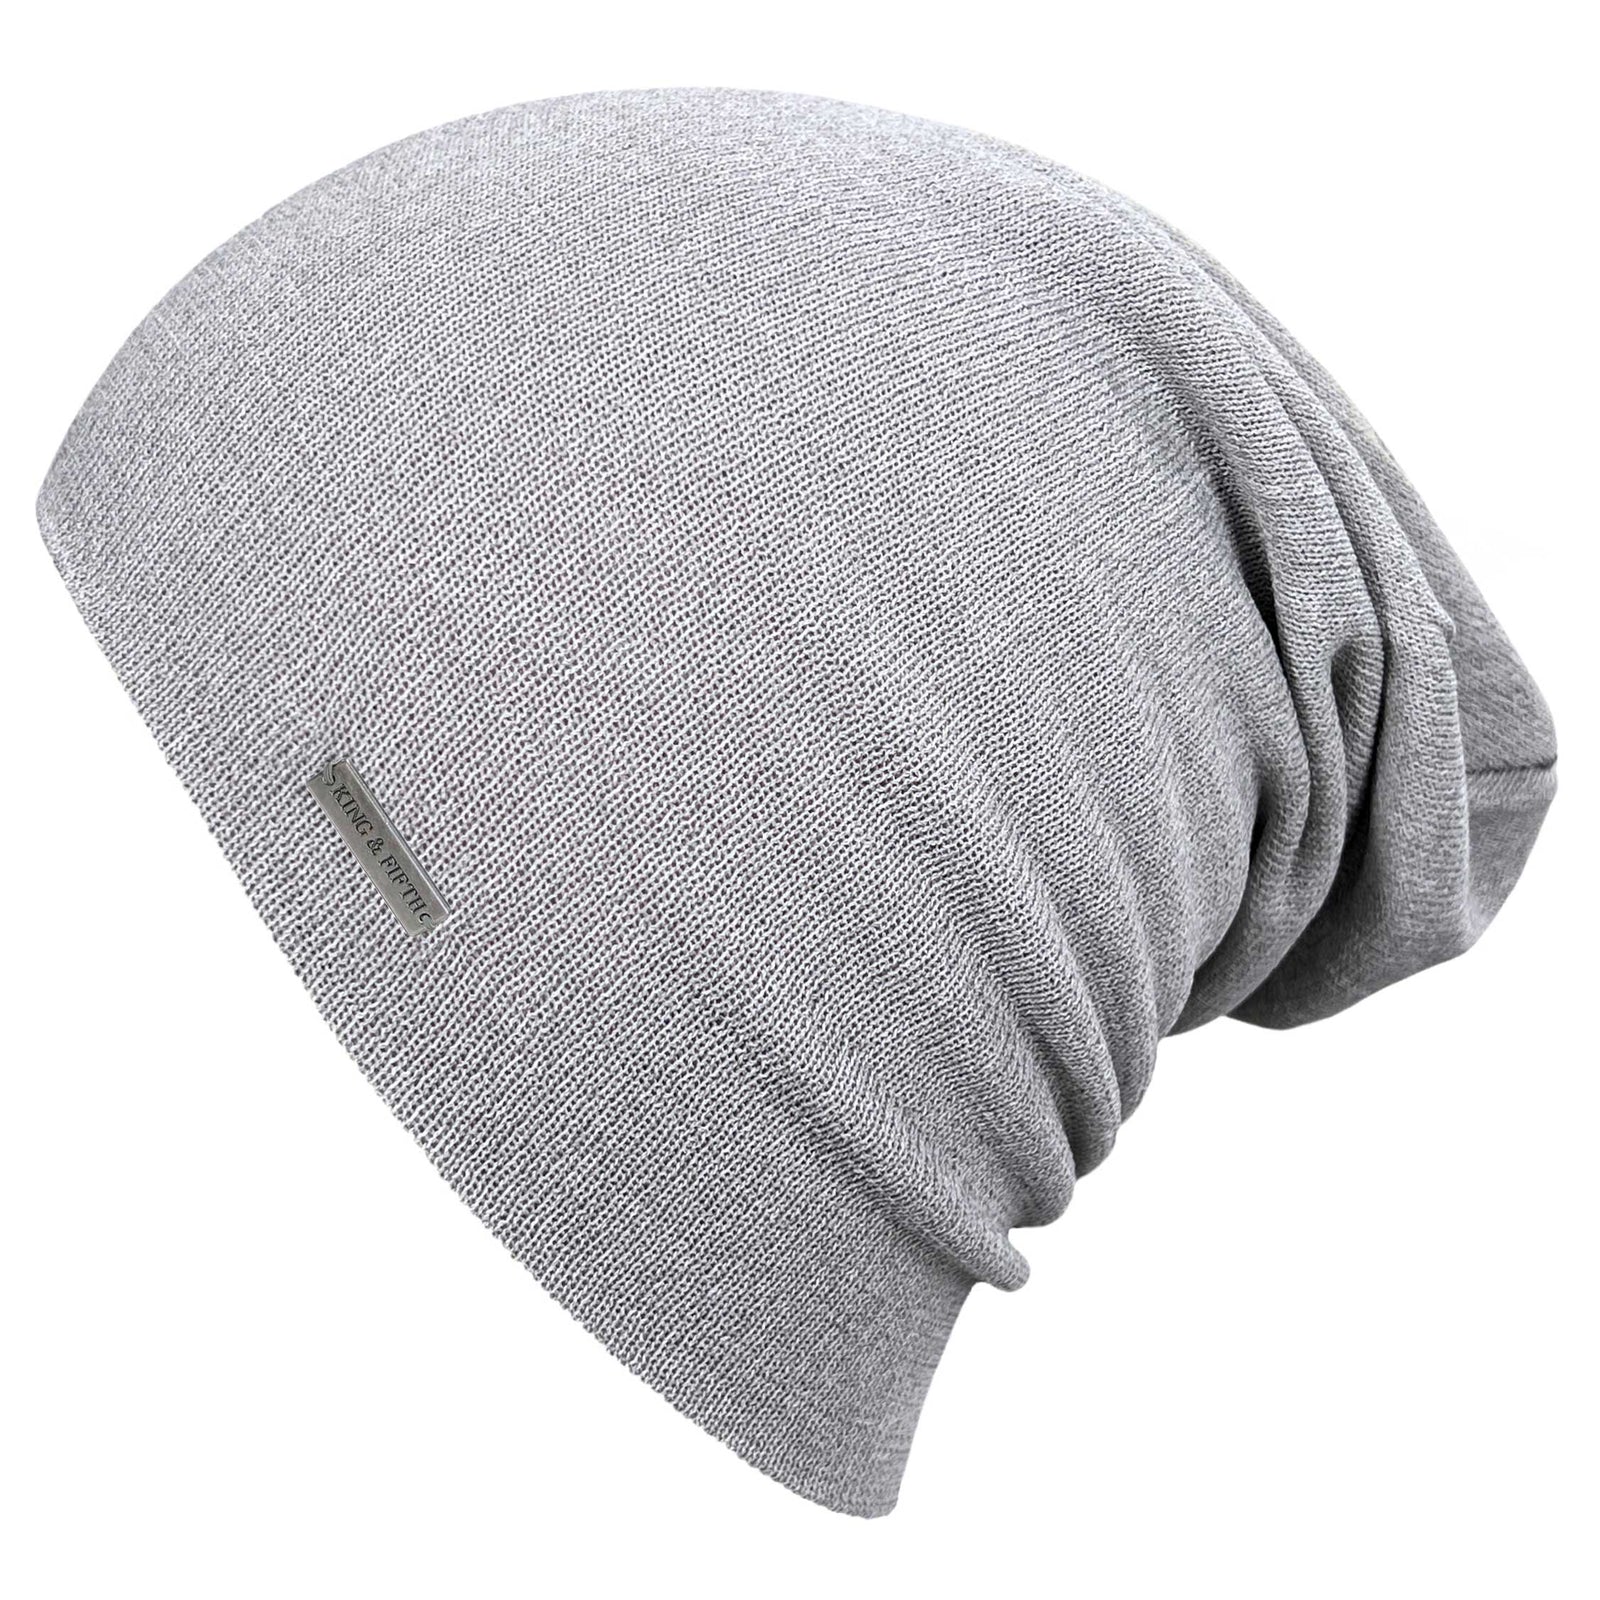 Mens Slouchy Beanies by K&F, Shop Slouchy Beanie